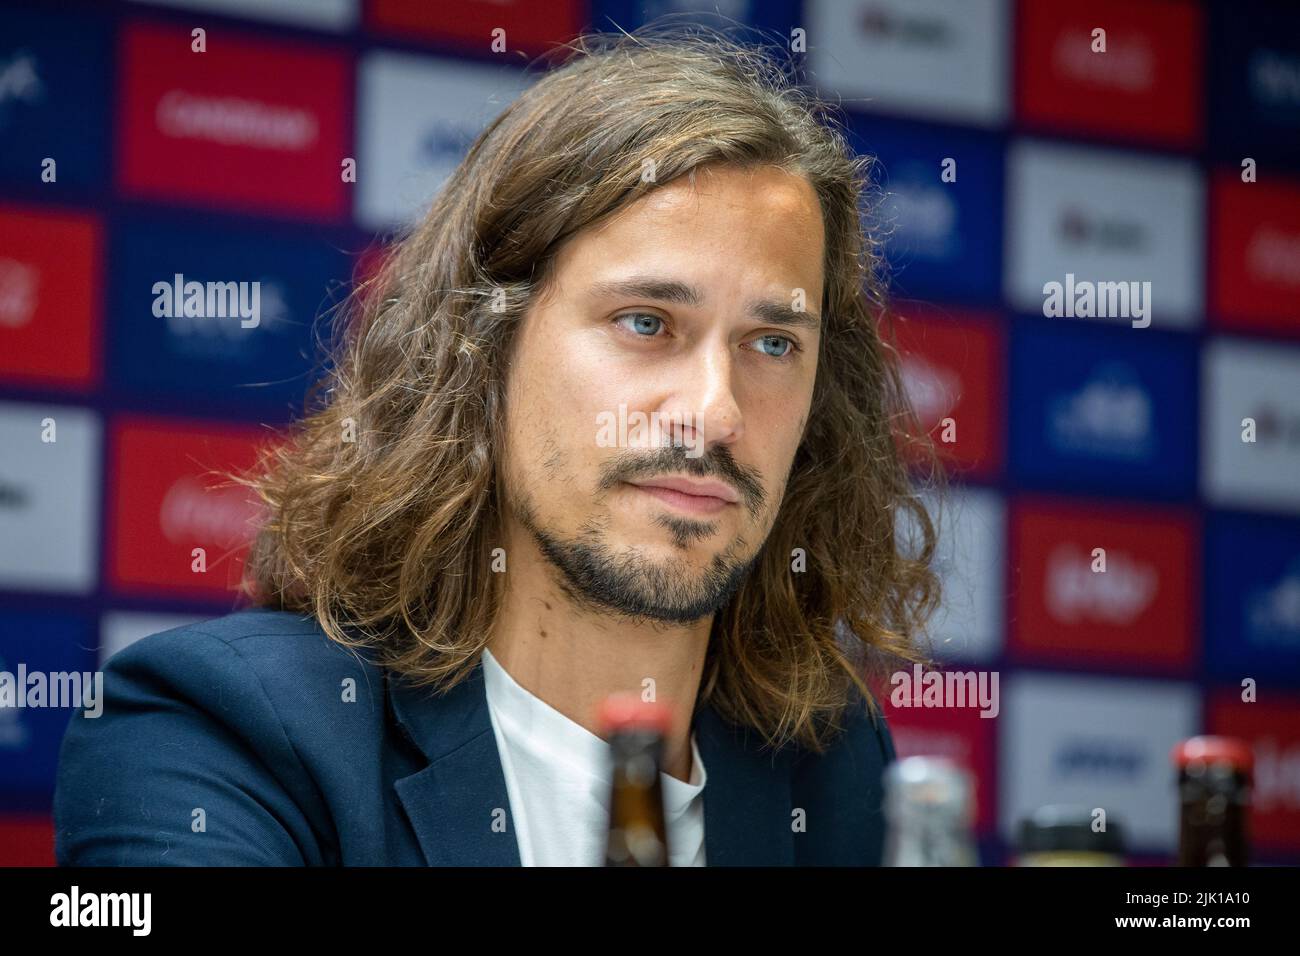 Brussels, Belgium. 29th July, 2022. Anderlecht's spokesman Mathias Declercq pictured during the weekly press conference of Belgian soccer team RSC Anderlecht, Friday 29 July 2022 in Brussels, to discuss the next game in the national competition. BELGA PHOTO NICOLAS MAETERLINCK Credit: Belga News Agency/Alamy Live News Stock Photo